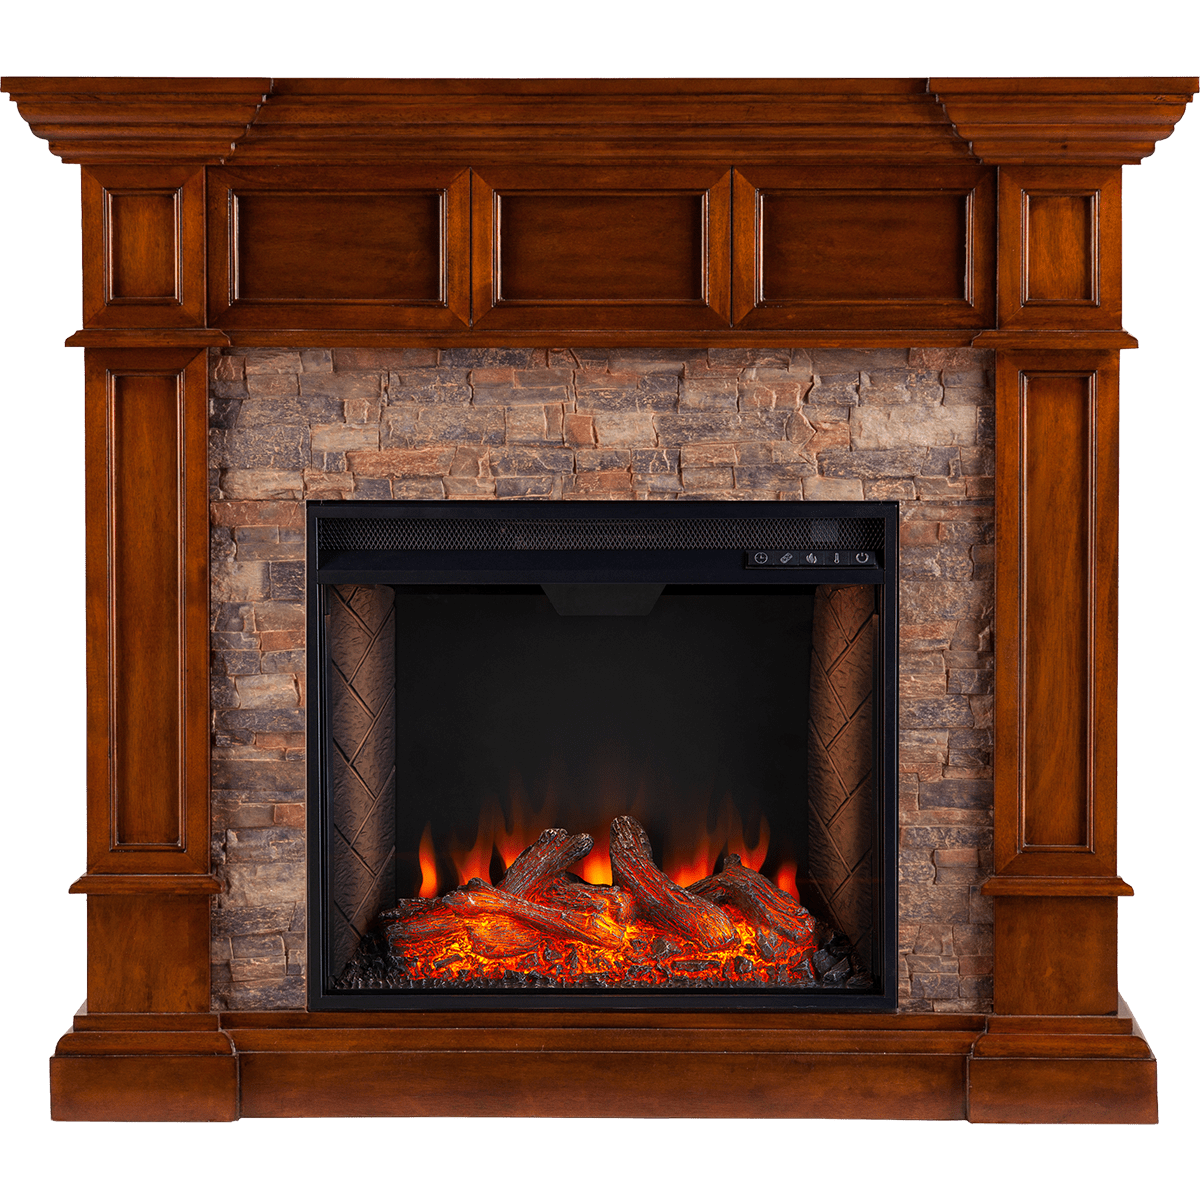 Stacked Stone Fireplace Cost Awesome southern Enterprises Merrimack Simulated Stone Convertible Electric Fireplace